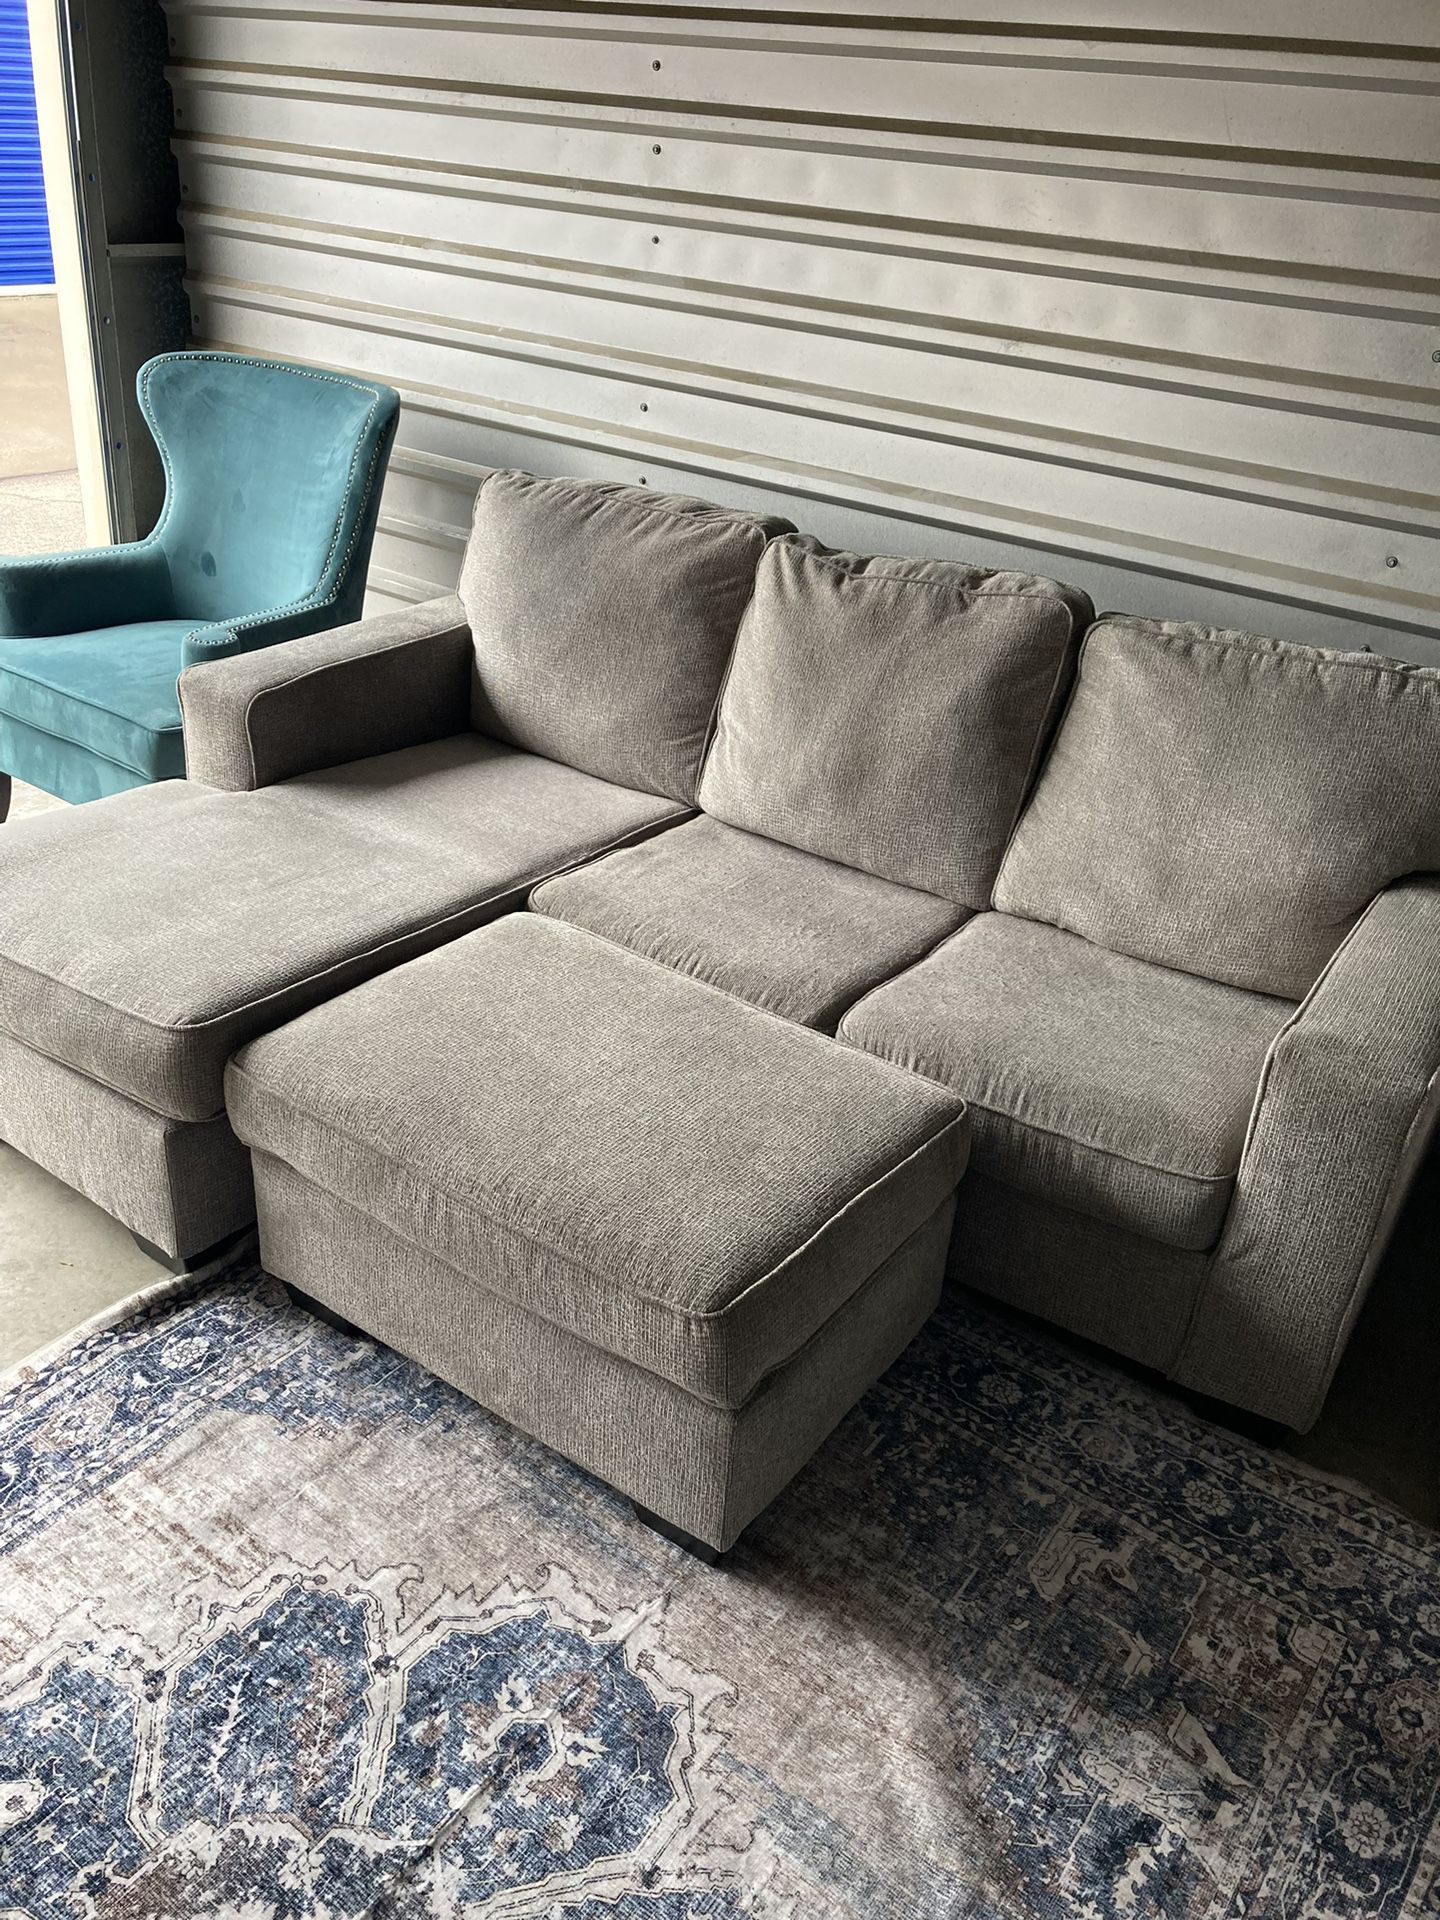 Free Delivery! Gray L shape sofa with ottoman included